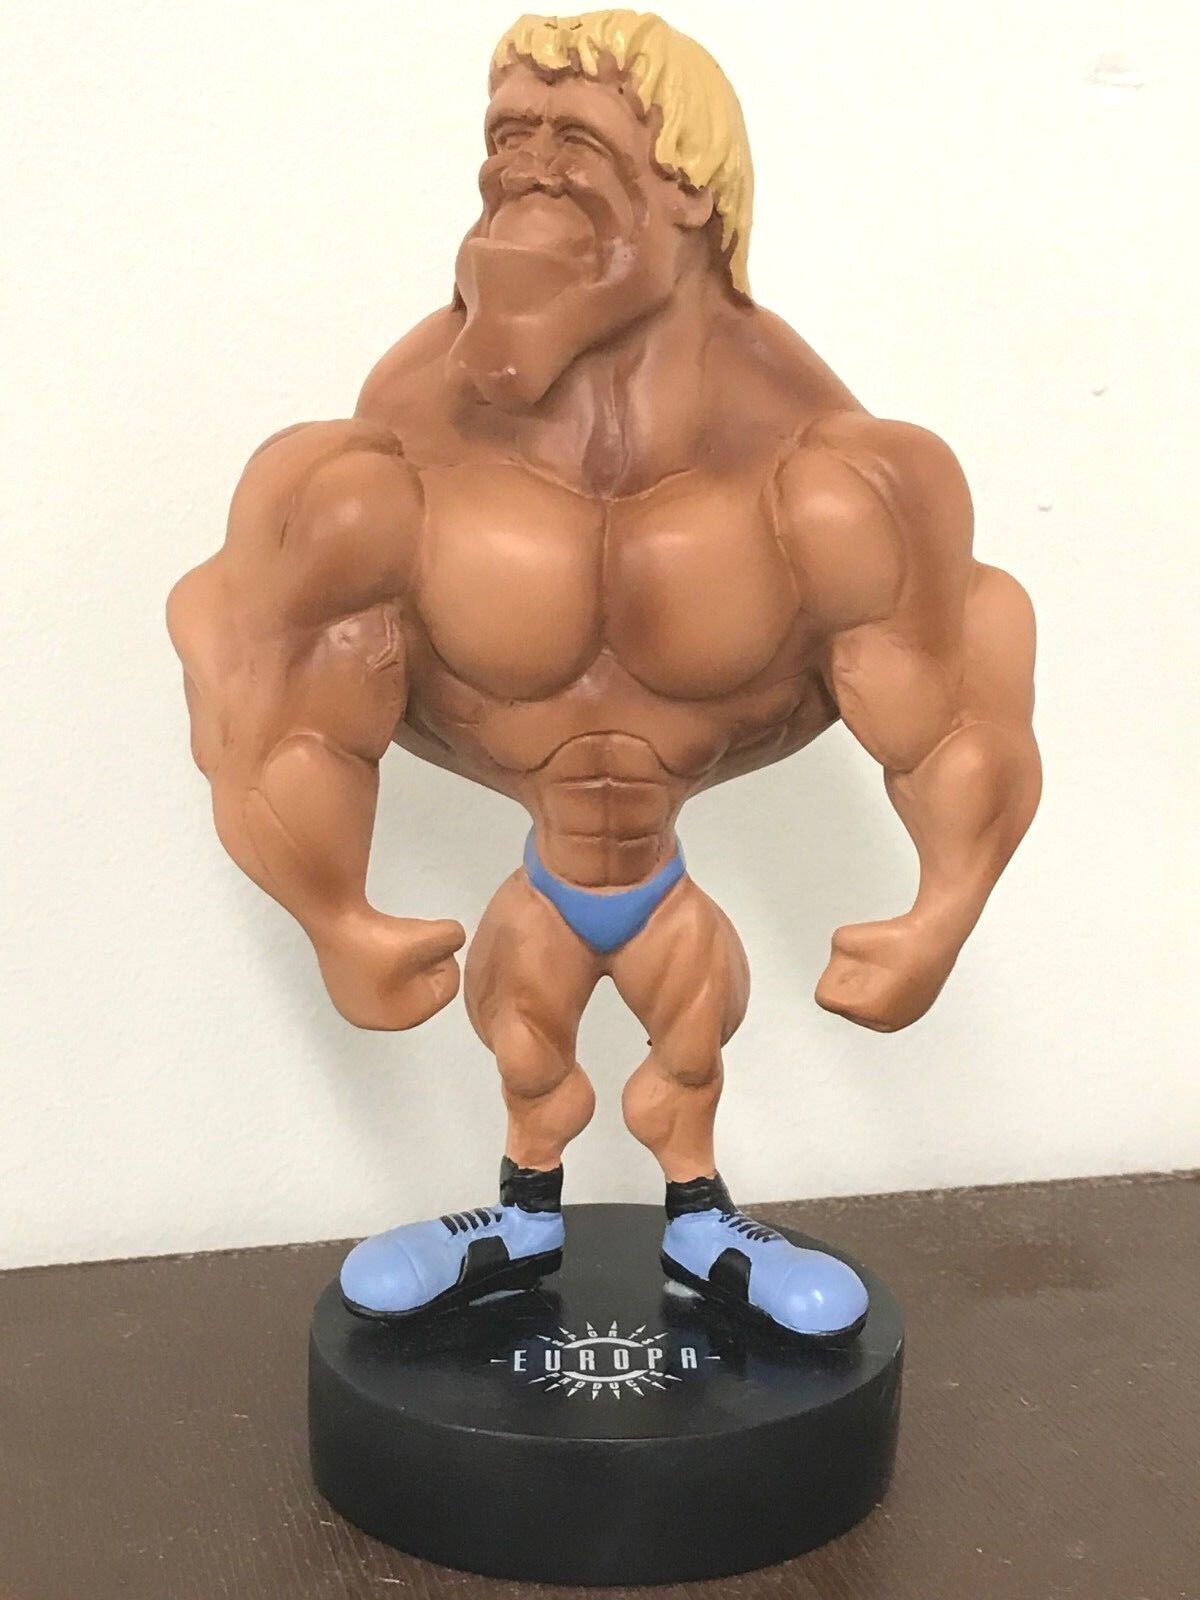 Europa Man Bodybuilding Xtreme Figurine Collectible Muscle Statue Trophy